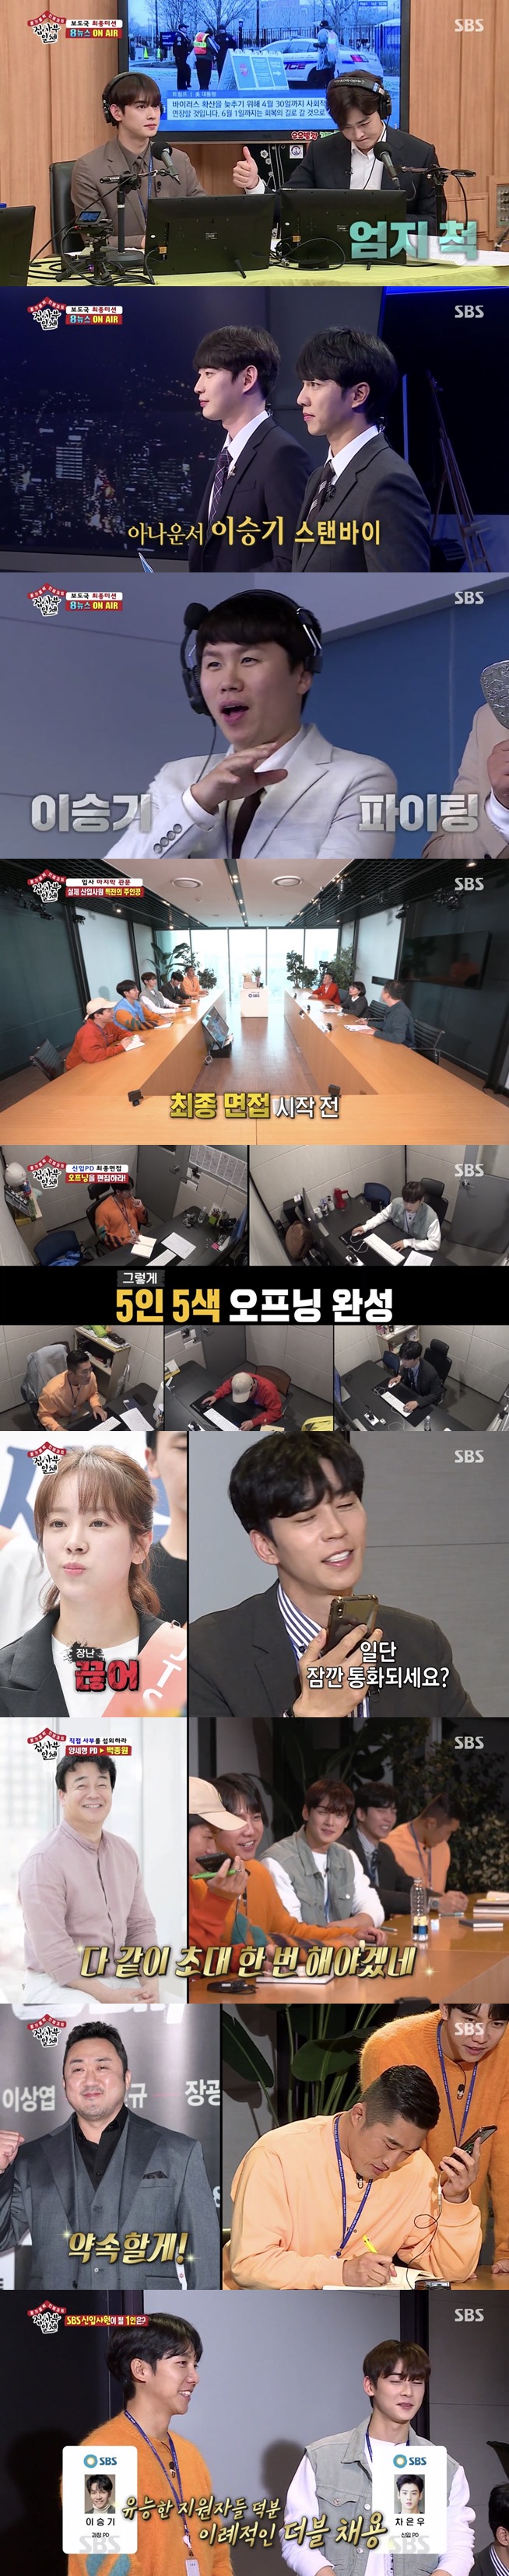 All The Butlers members challenged SBS Super Rookie, Lee Seung-gi and Cha Eun-woo passed the final interview.SBS entertainment All The Butlers broadcasted on the 19th was featured on SBS Super Rookie Recruitment Day.Lee Seung-gi, Yang Se-hyeong, Shin Sung-rok, Kim Dong-Hyun and Cha Eun-woo passed the 8 oclock news and went to the final interview.Lee Seung-gi looked nervous as she prepared for the 8pm sports news.Kim Dong-Hyun was the assistant director and prepared for the live broadcast with Mike Test, while Cha Eun-woo practiced radio news.Kim Yoon-sang announcer, Yang Se-hyeong, and Lee Seung-gi praised Cha Eun-woos radio news and praised the correct pronunciation and listening voice.Lee Seung-gi then entered the news studio; with sports news beginning, and all attention, Lee Seung-gi made a point in a professional appearance.In the meantime, the radio news team joined, and the members passed the press interview.The members then headed to the final interview room: Choi Young-in, general manager, Park Sung-hoon, CP, and Kwak Seung-young CP.Before the interview, the members stopped by the editorial office to find the PD All The Butlers, who explained that it was a place to edit and send out what they shot.Kim Dong-Hyun asked, How many hours of shooting do you have when you do 80 minutes? PD added, Sometimes its 20 hours. Cameras usually have 40s.The general manager gave me homework, and you can edit the shoots yourself, said Kim Solmaro, who said, This is really hard.I cant begin with what to do. Shin Sung-rok was desperate for the editor to be Ry, who was a bold editor.First, the editing of Cha Eun-woo was released; the editing of Cha Eun-woo felt like a definite emphasis on the appearance.Shin Sung-rok said, Is it direct cam? Yang Se-hyeong added, This is not All The Butlers.The following was a video by Lee Seung-gi; Lee Seung-gi presented a quick cut editing.Lee Seung-gi made Cha Eun-woo look like a fixed-up man with the devils editing.I was really looking forward to it, but I thought that Lee Seung-gi would be able to do what we want if Lee Seung-gi came out, said Kwak Seung-young, CP.Kim Dong-Hyuns video was then released, and Kim Dong-Hyun edited the front scene and edited only his appearance screen.Yang Se-hyeong said, It was so funny.The task was to direct the master. The first runner was Shin Sung-rok.Shin Sung-rok called actor Han Ji-min and Han Ji-min laughed when he said, I thought you were drunk.Han Ji-min responded to Shin Sung-roks persuasion with a smile saying, You are really good at broadcasting? And You are trying hard.Shin Sung-rok appealed for authenticity, saying, Mr. Ji Min does not have to appear, but then I can not join.Cha Eun-woo called You Hee-yeol, saying, I have never contacted you in private.You Hee-yeol said, I first called Jung Eun-woo, but this friend is more insane than I see. Its not a good term for broadcasting, but its really crazy.In Cha Eun-woos calm and logical persuasion, You Hee-yeol said, You saw it well. I almost made a promise.If you have a chance to meet later, it would be good to see it then. Yang Se-hyeong then called Baek Jong-won.Yang Se-hyeong said, I want to taste Baek Jong-won more than taste now. Baek Jong-won said, I am persuaded.I cant say dont be funny when you do this, said Baek Jong-won, who responded positively, Ill think about it. Ill invite everyone together sometime.Next, Kim Dong-Hyun connected the call to the actor Ma Dong-Seok.Kim Dong-Hyun asked Ma Dong-Seok for his best regards, and Ma Dong-Seok said, I filmed Eternals for six months and I am preparing Crime City 2.Ma Dong-Seok said, Tell me anything, whatever Dong Hyun tells me! It is hard to get out of it, and if you have a chance next time, you will show action.Kim Dong-Hyun received a definite answer with a persistent power and received applause.Lee Seung-gi said, I feel so thrilled to hear these two letters.Lee Seung-gi called director Bong Joon-ho, saying, He is a new writer of the history of the Republic of Korea. However, the phone was turned off and laughed.Lee Seung-gi then left a voice message with a desperate heart.After the extra-territorial test, the Super Rookie announcement followed: Cha Eun-woo was hired as Super Rookie and Lee Seung-gi as the chief.Choi Young, general manager, said, Mr. Seung-gi was the most experienced.I have a senior who is skilled, so I chose Cha Eun-woo because of the possibility of growth, said Jung Eun-woo, who has grown up in a short period of time.Mr. Seung-ki will hire him as a career manager, he said.Photo: SBS broadcast screen